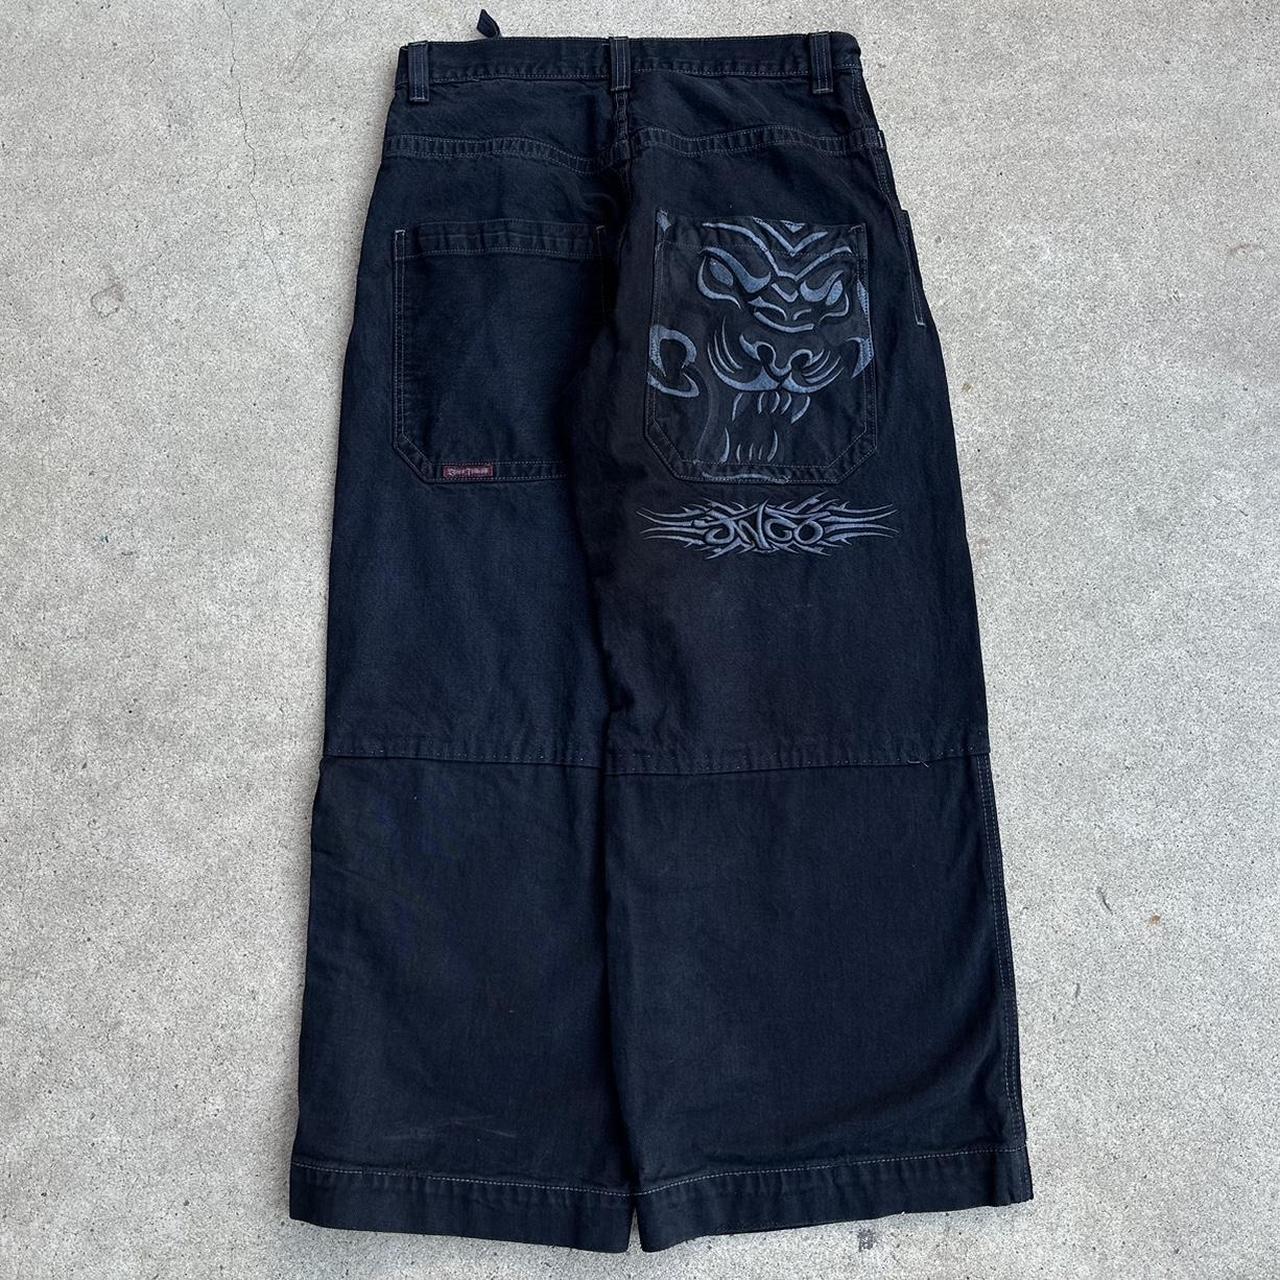 90s tiger tribal jnco Crazy grail pair with insane... - Depop